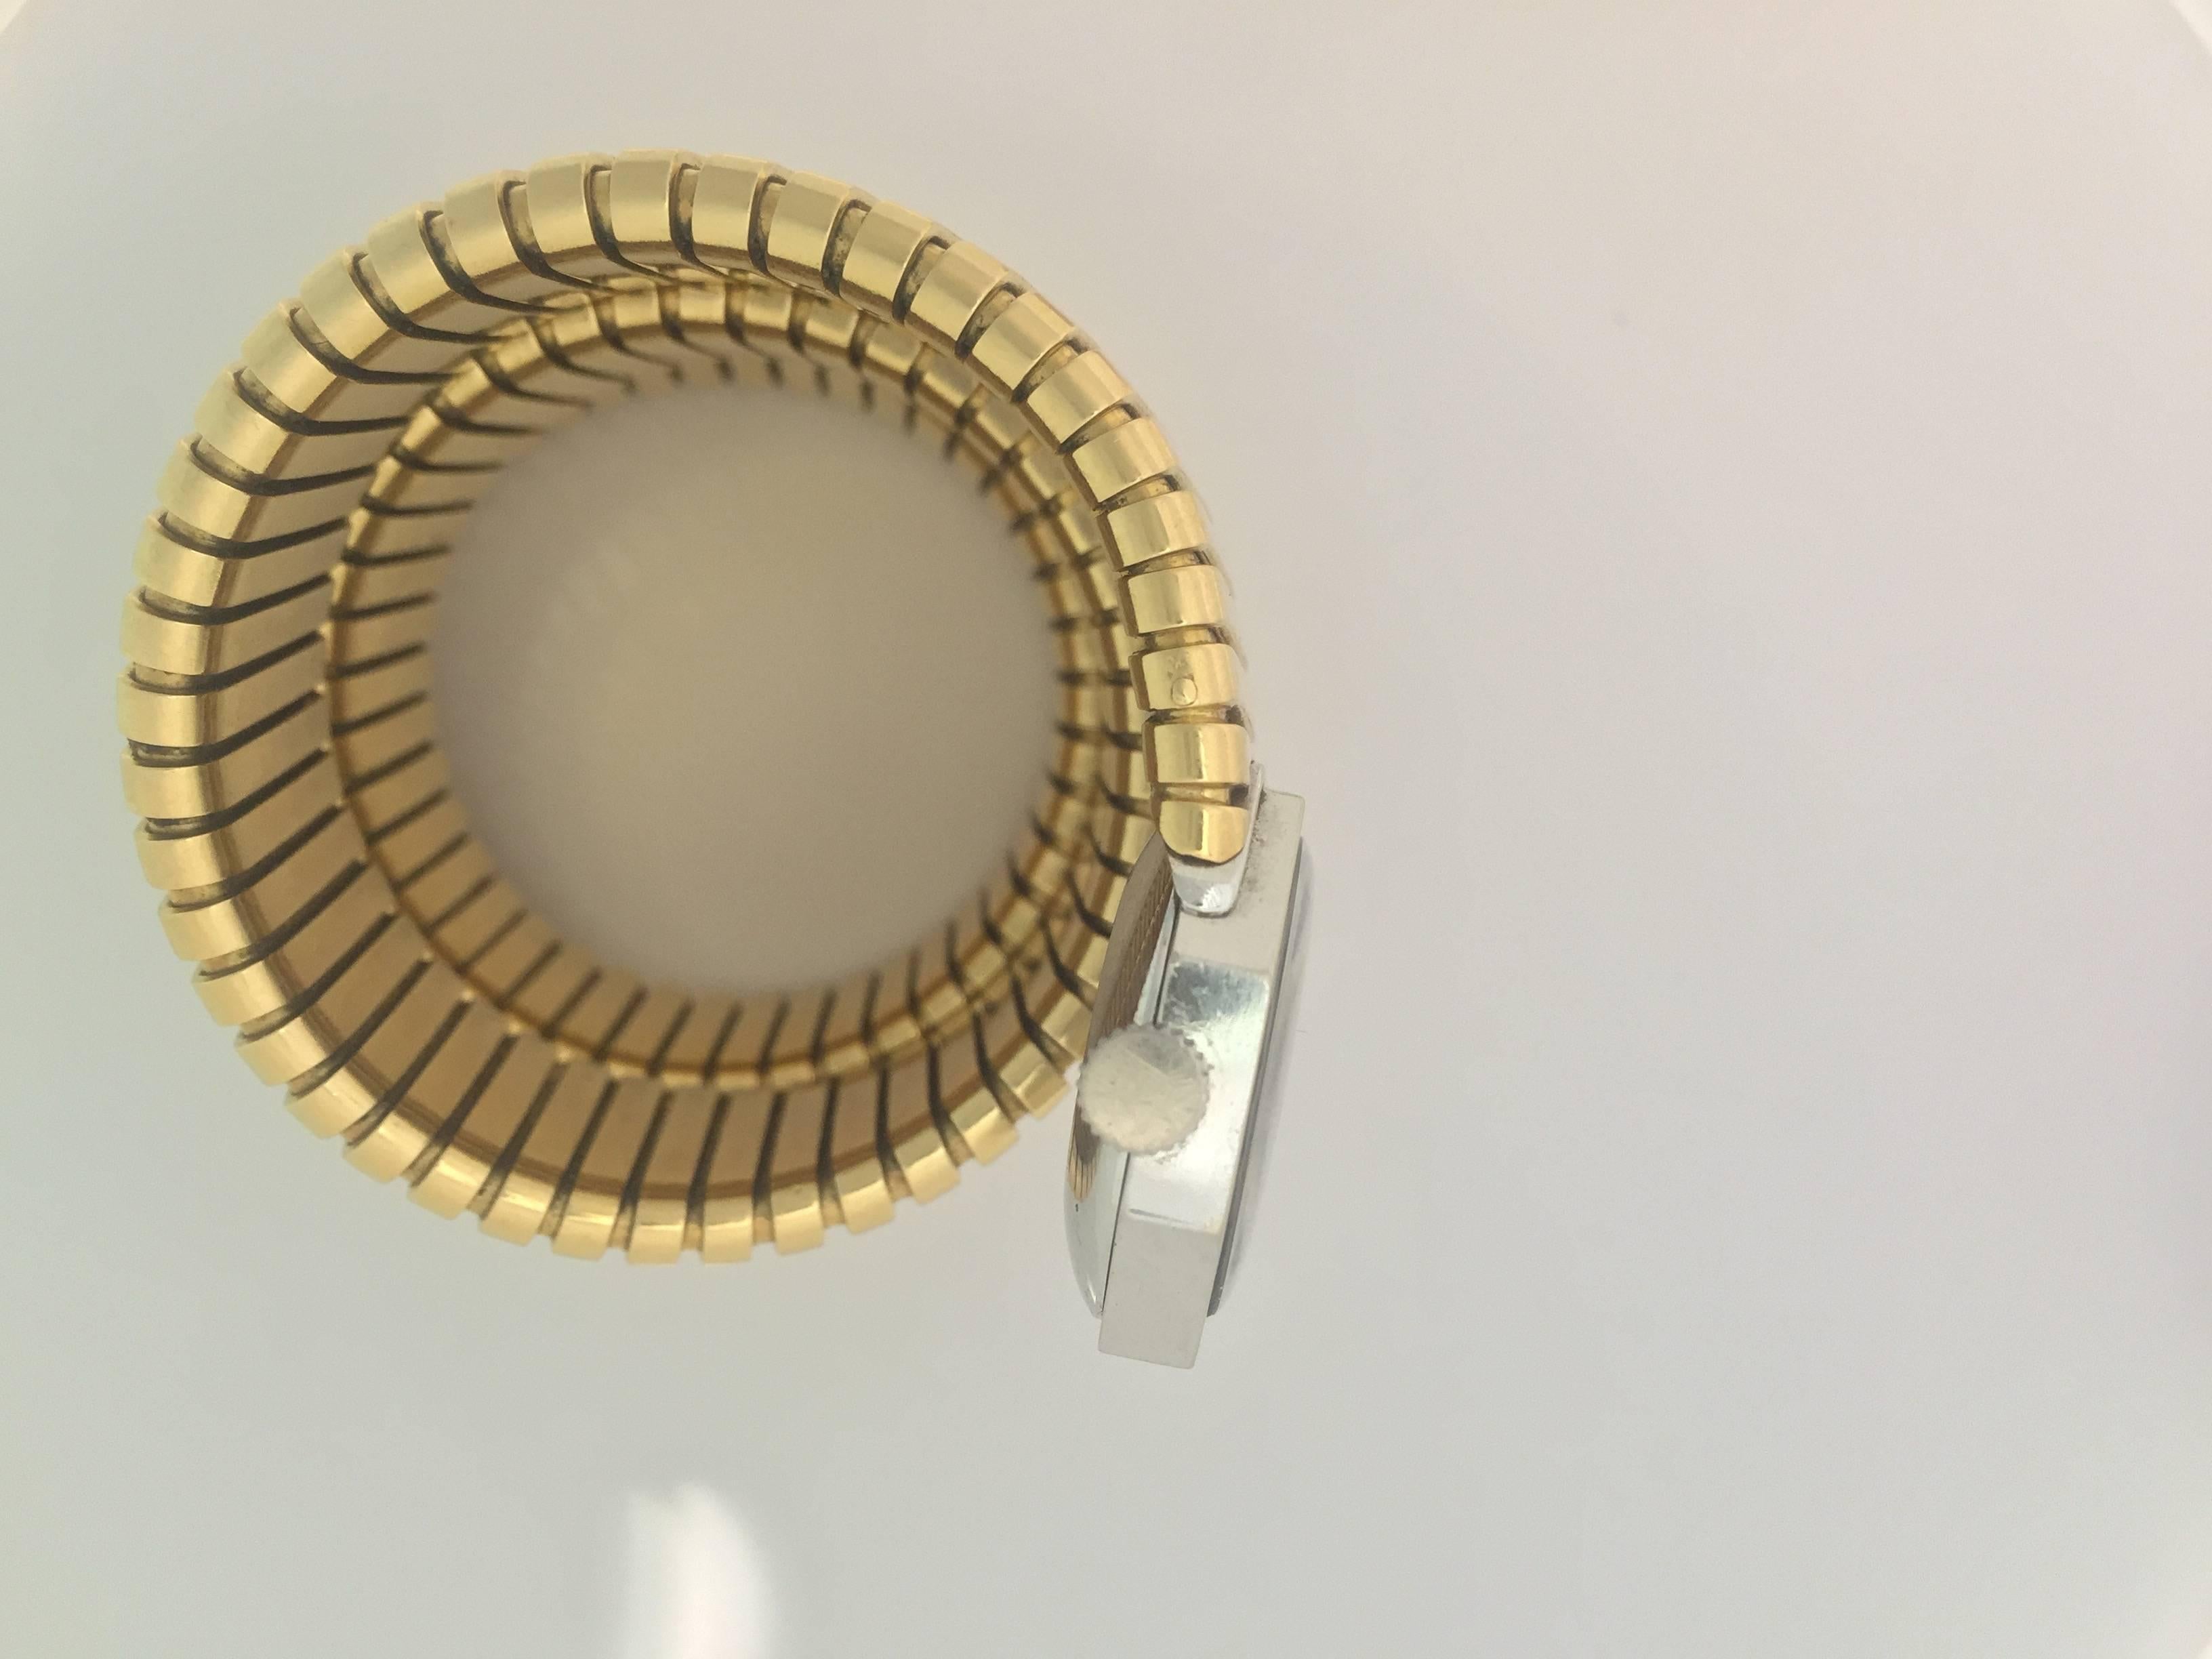 Bulgari lady's 18k yellow gold Tubogas bracelet watch, circa 1965, manual-wind  silvered dial with Roman numerals, and presenting an unusual octagonal dial mounted in 18k white gold.